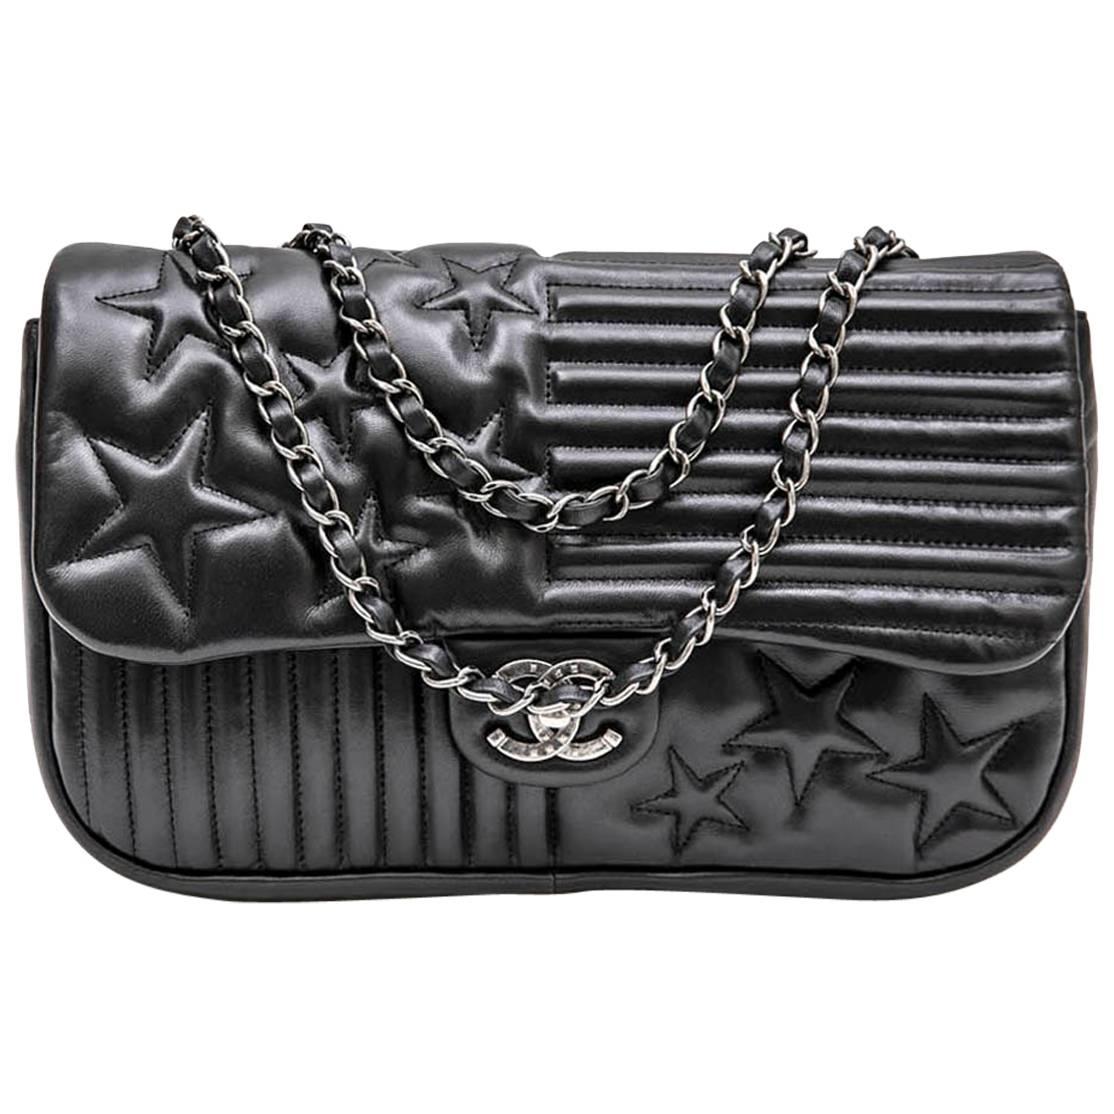 CHANEL 'Paris-Dallas' Flap Bag in Black Smooth Soft Lambskin Leather